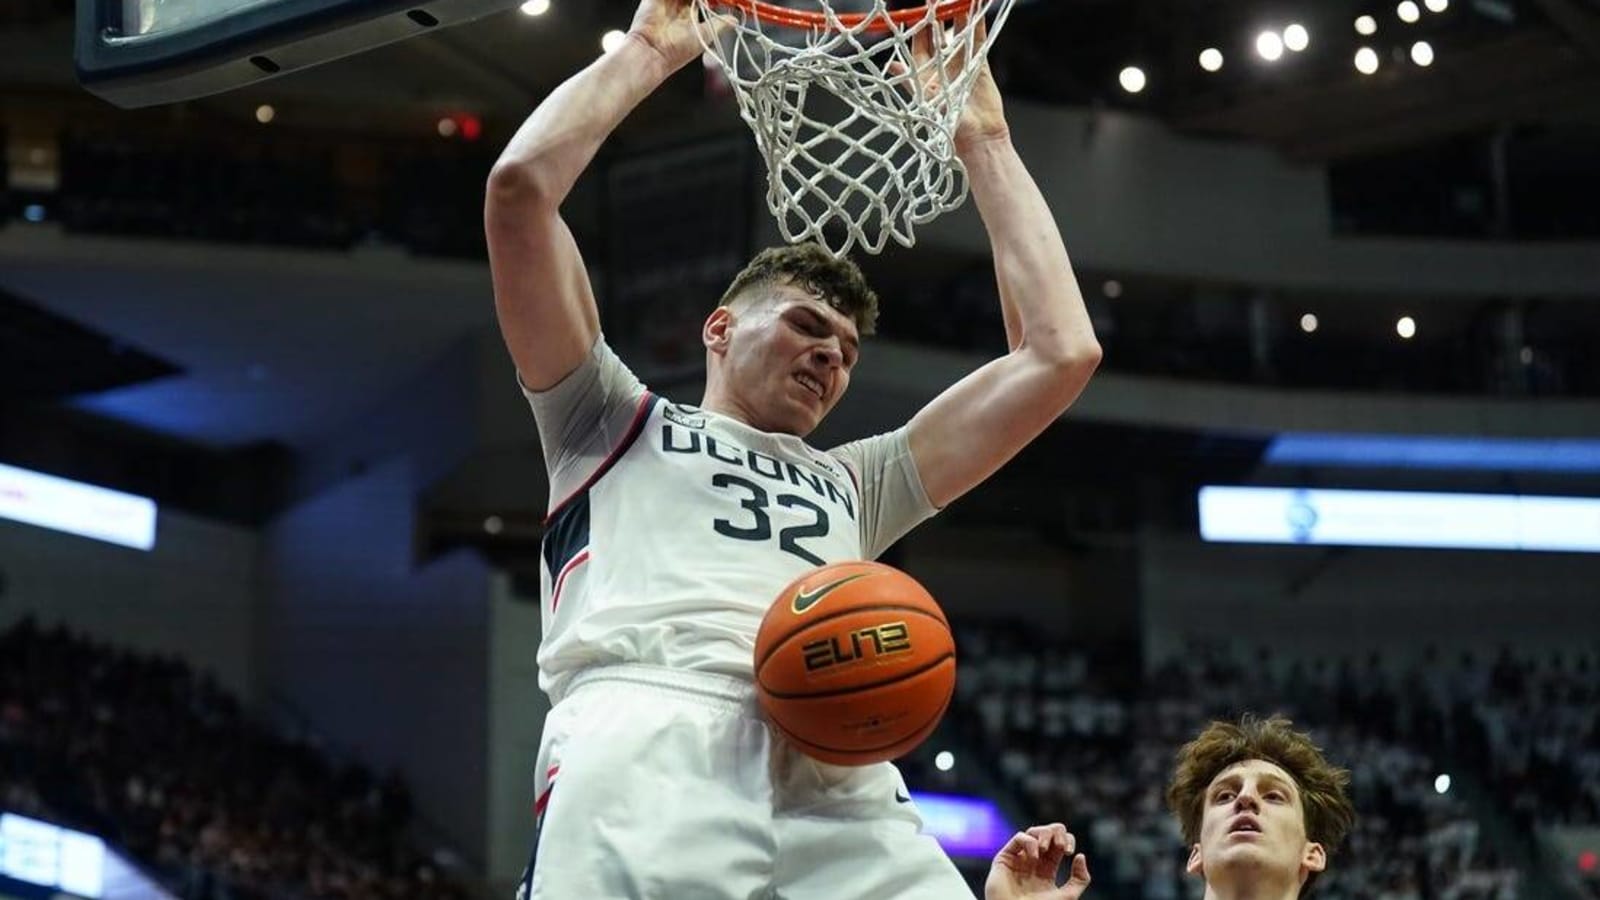 Pursuing history, No. 1 UConn faces road test at No. 17 Creighton